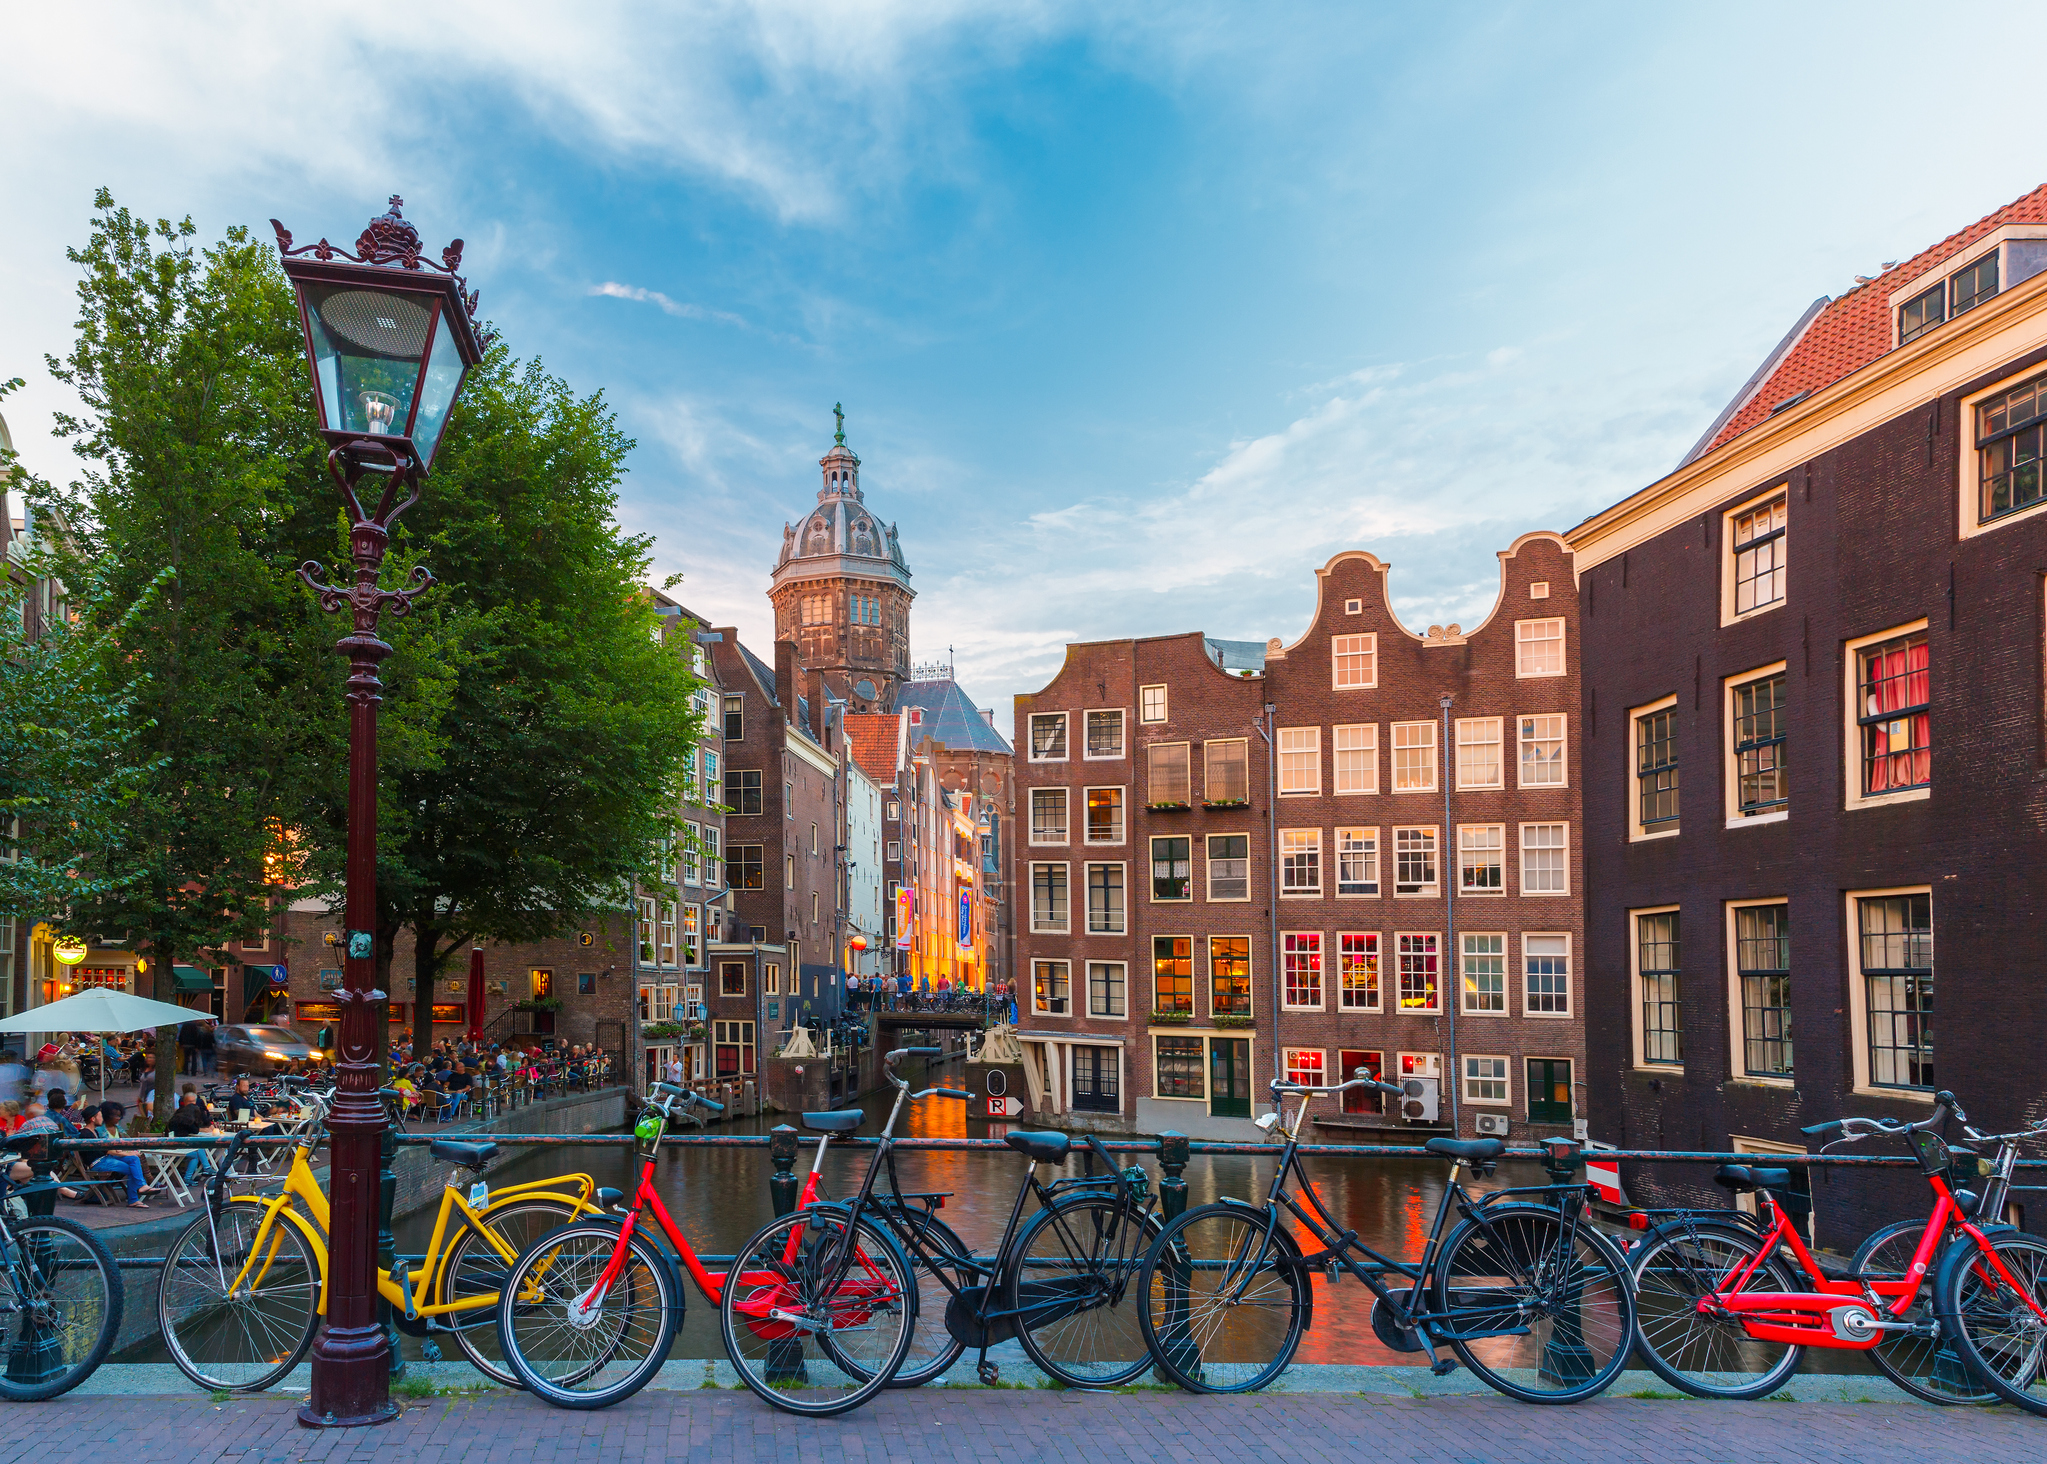 How To Rent A Bike In The Netherlands